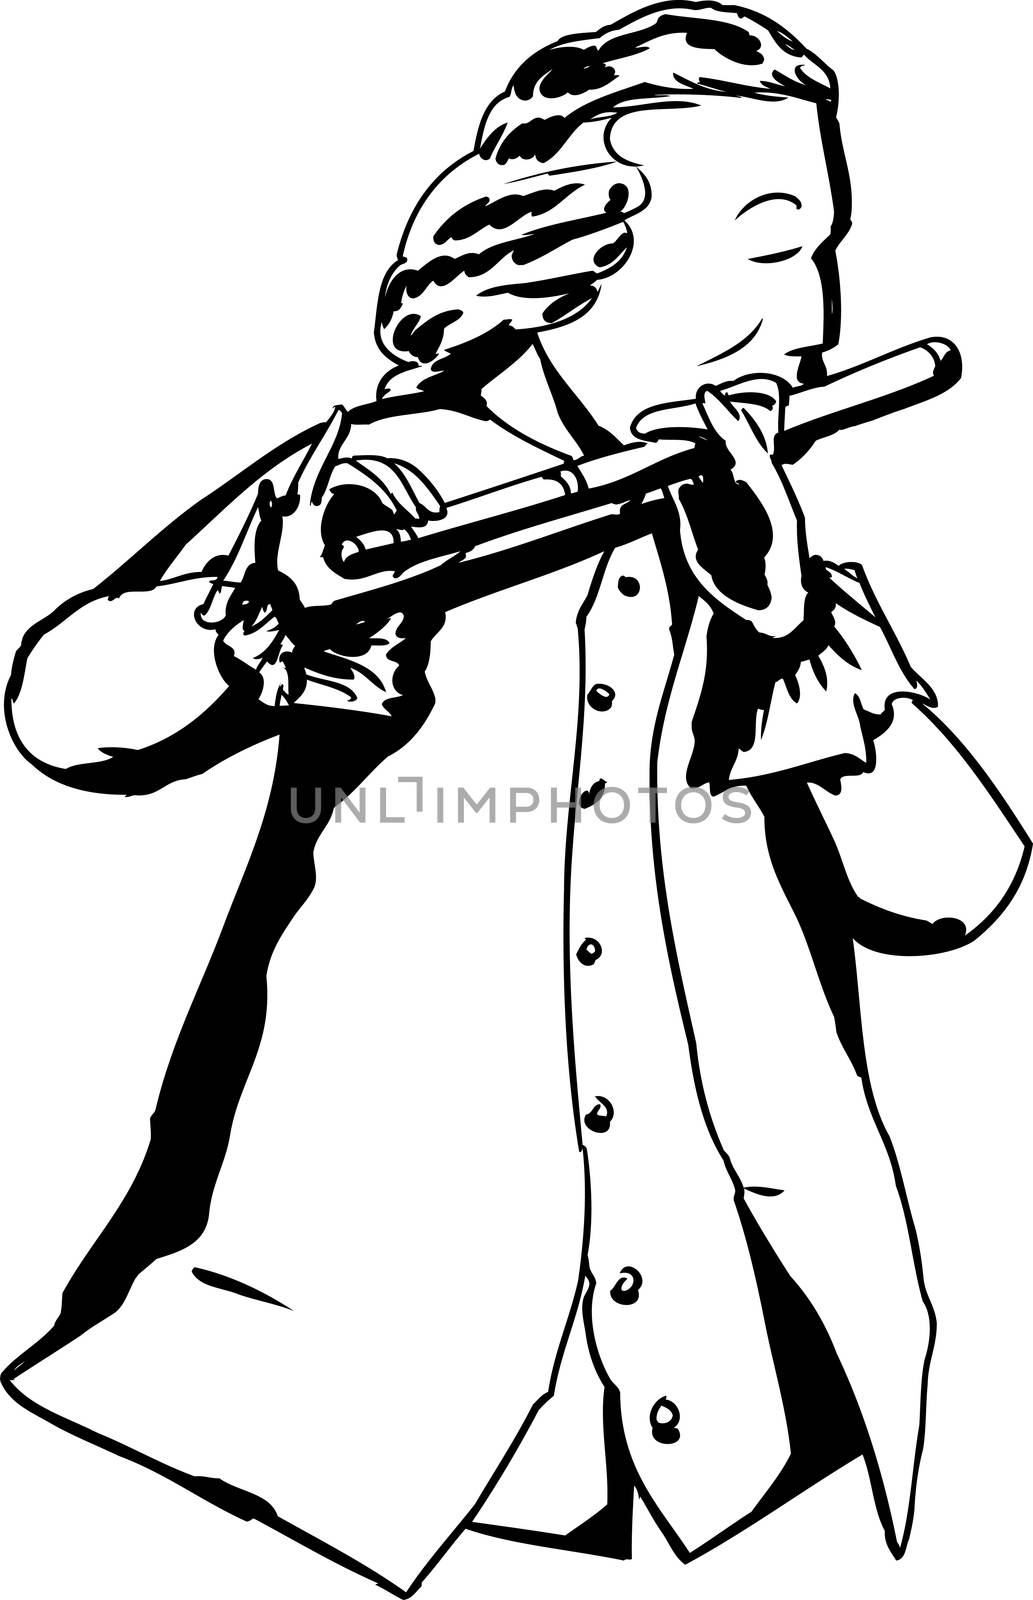 Outline illustration of single man in 18th century clothing and wig playing a flute